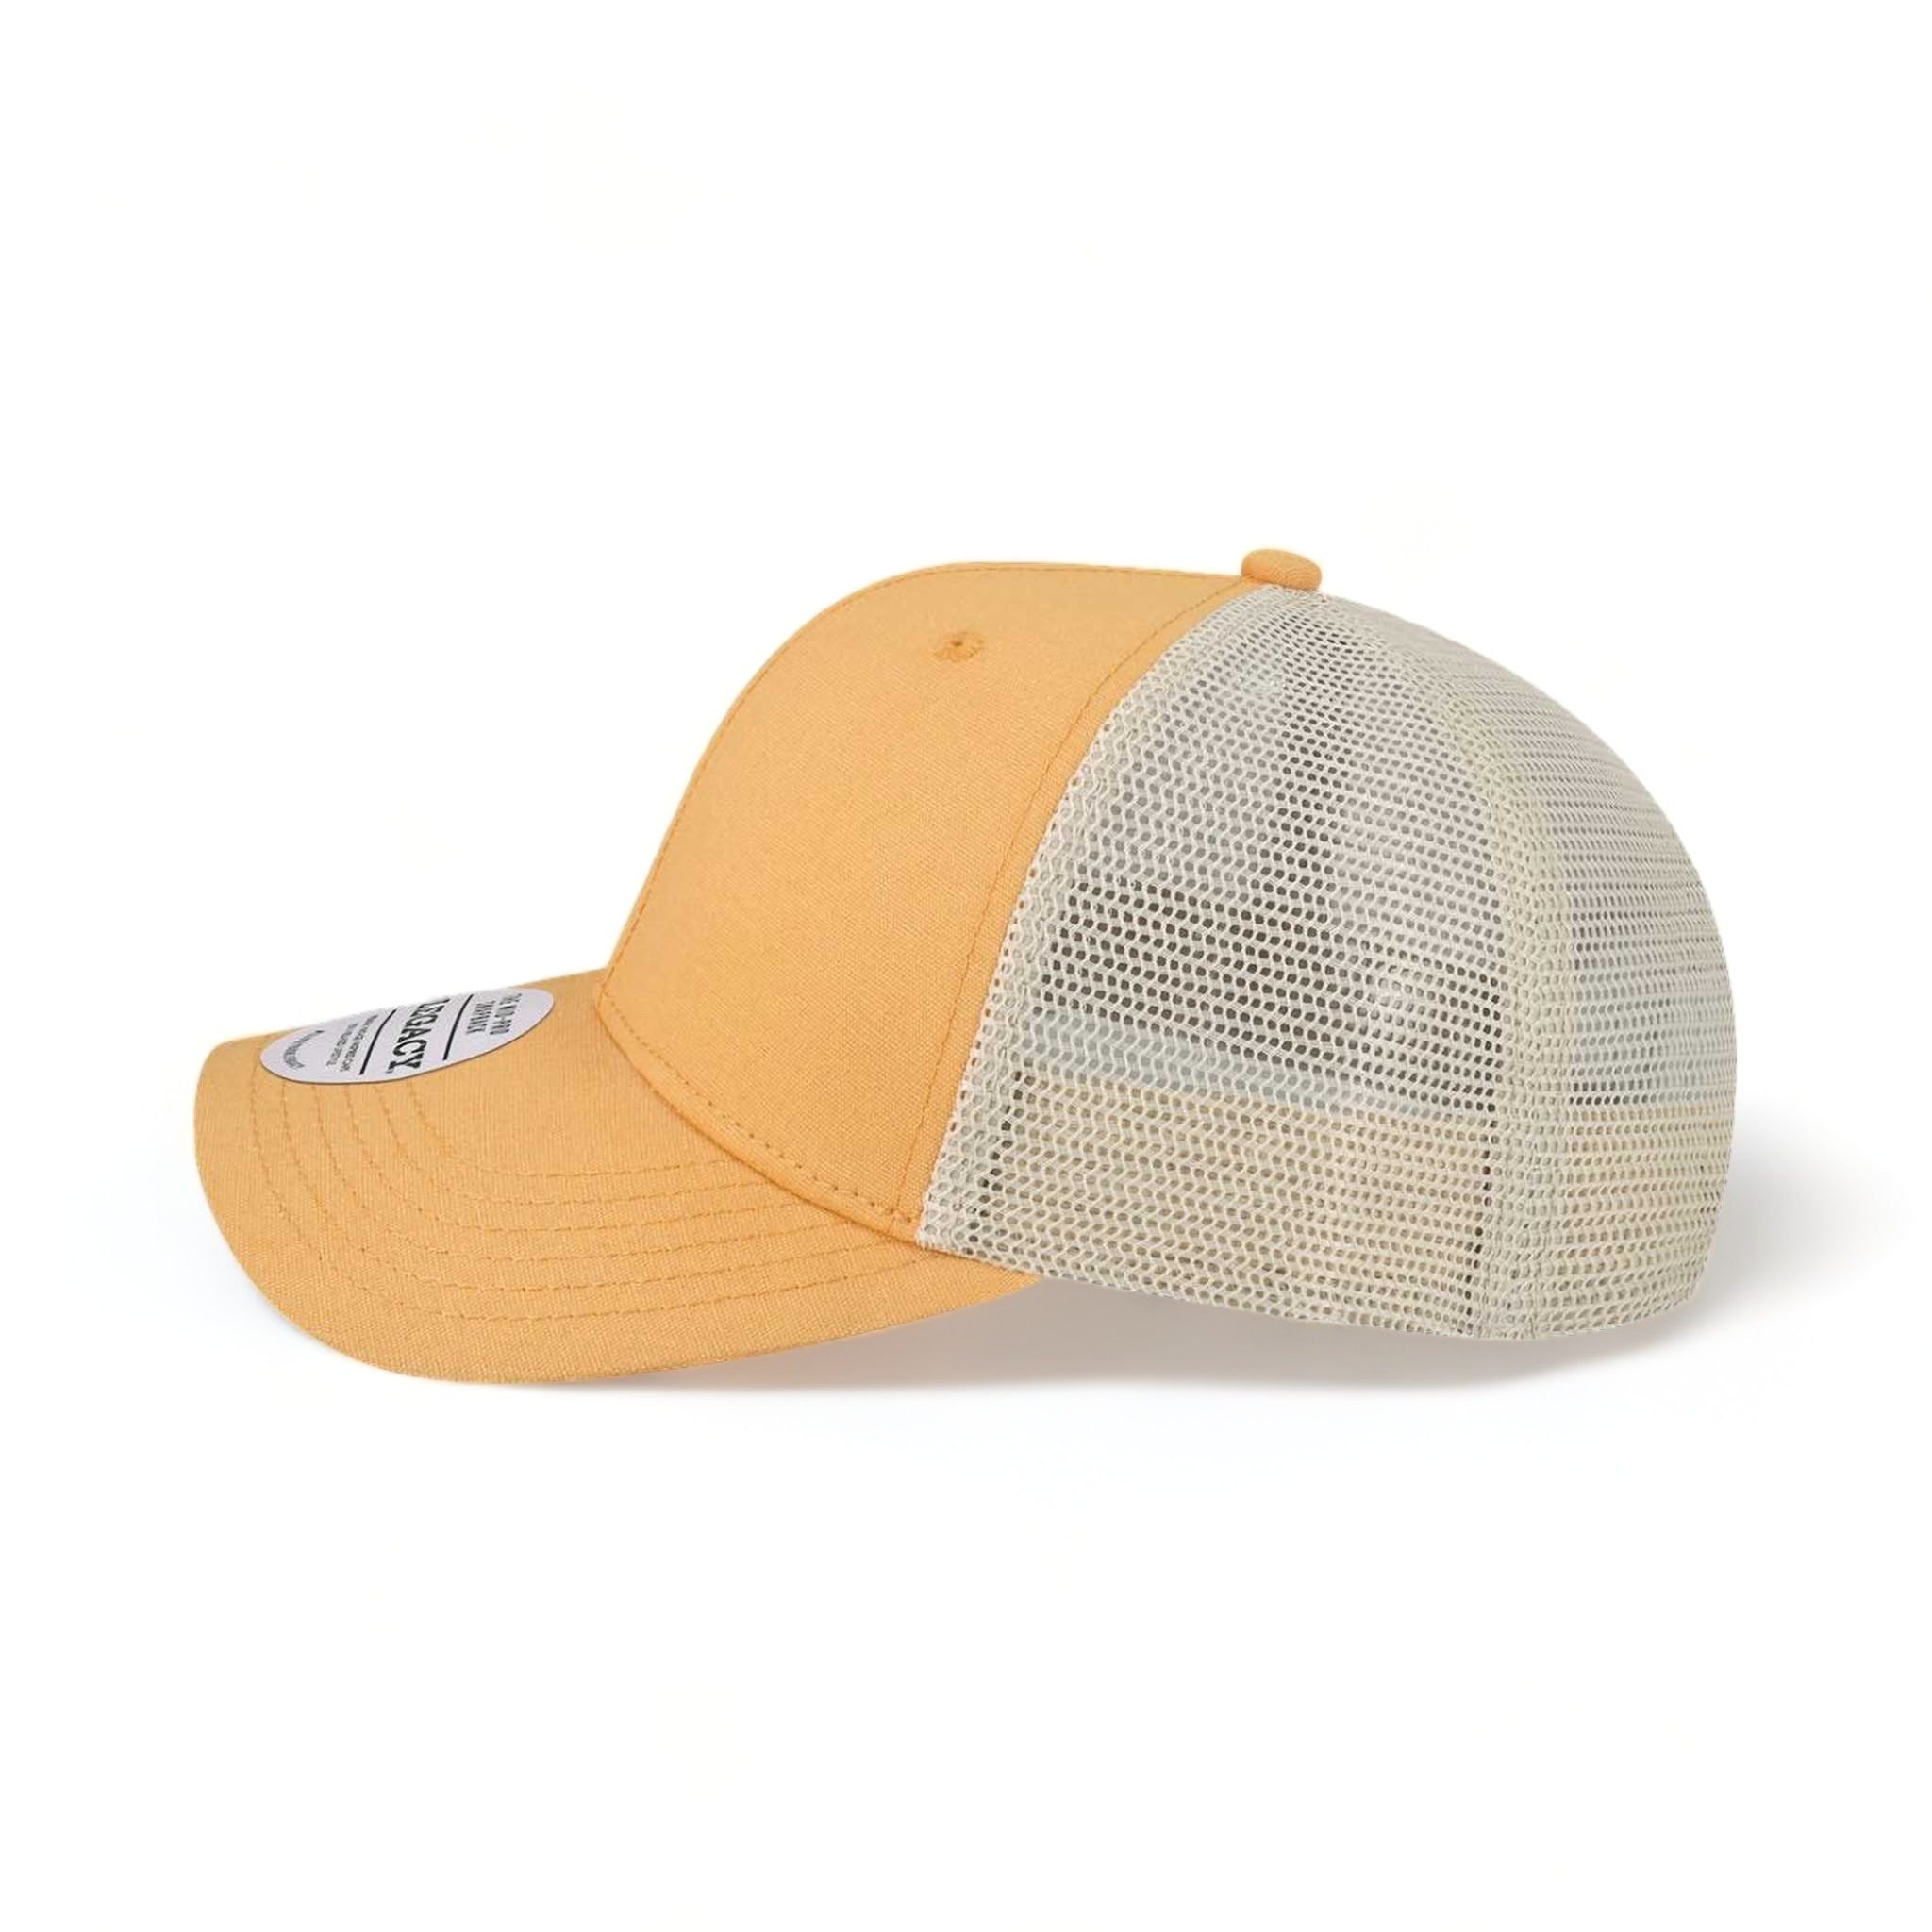 Side view of LEGACY MPS custom hat in peach and stone